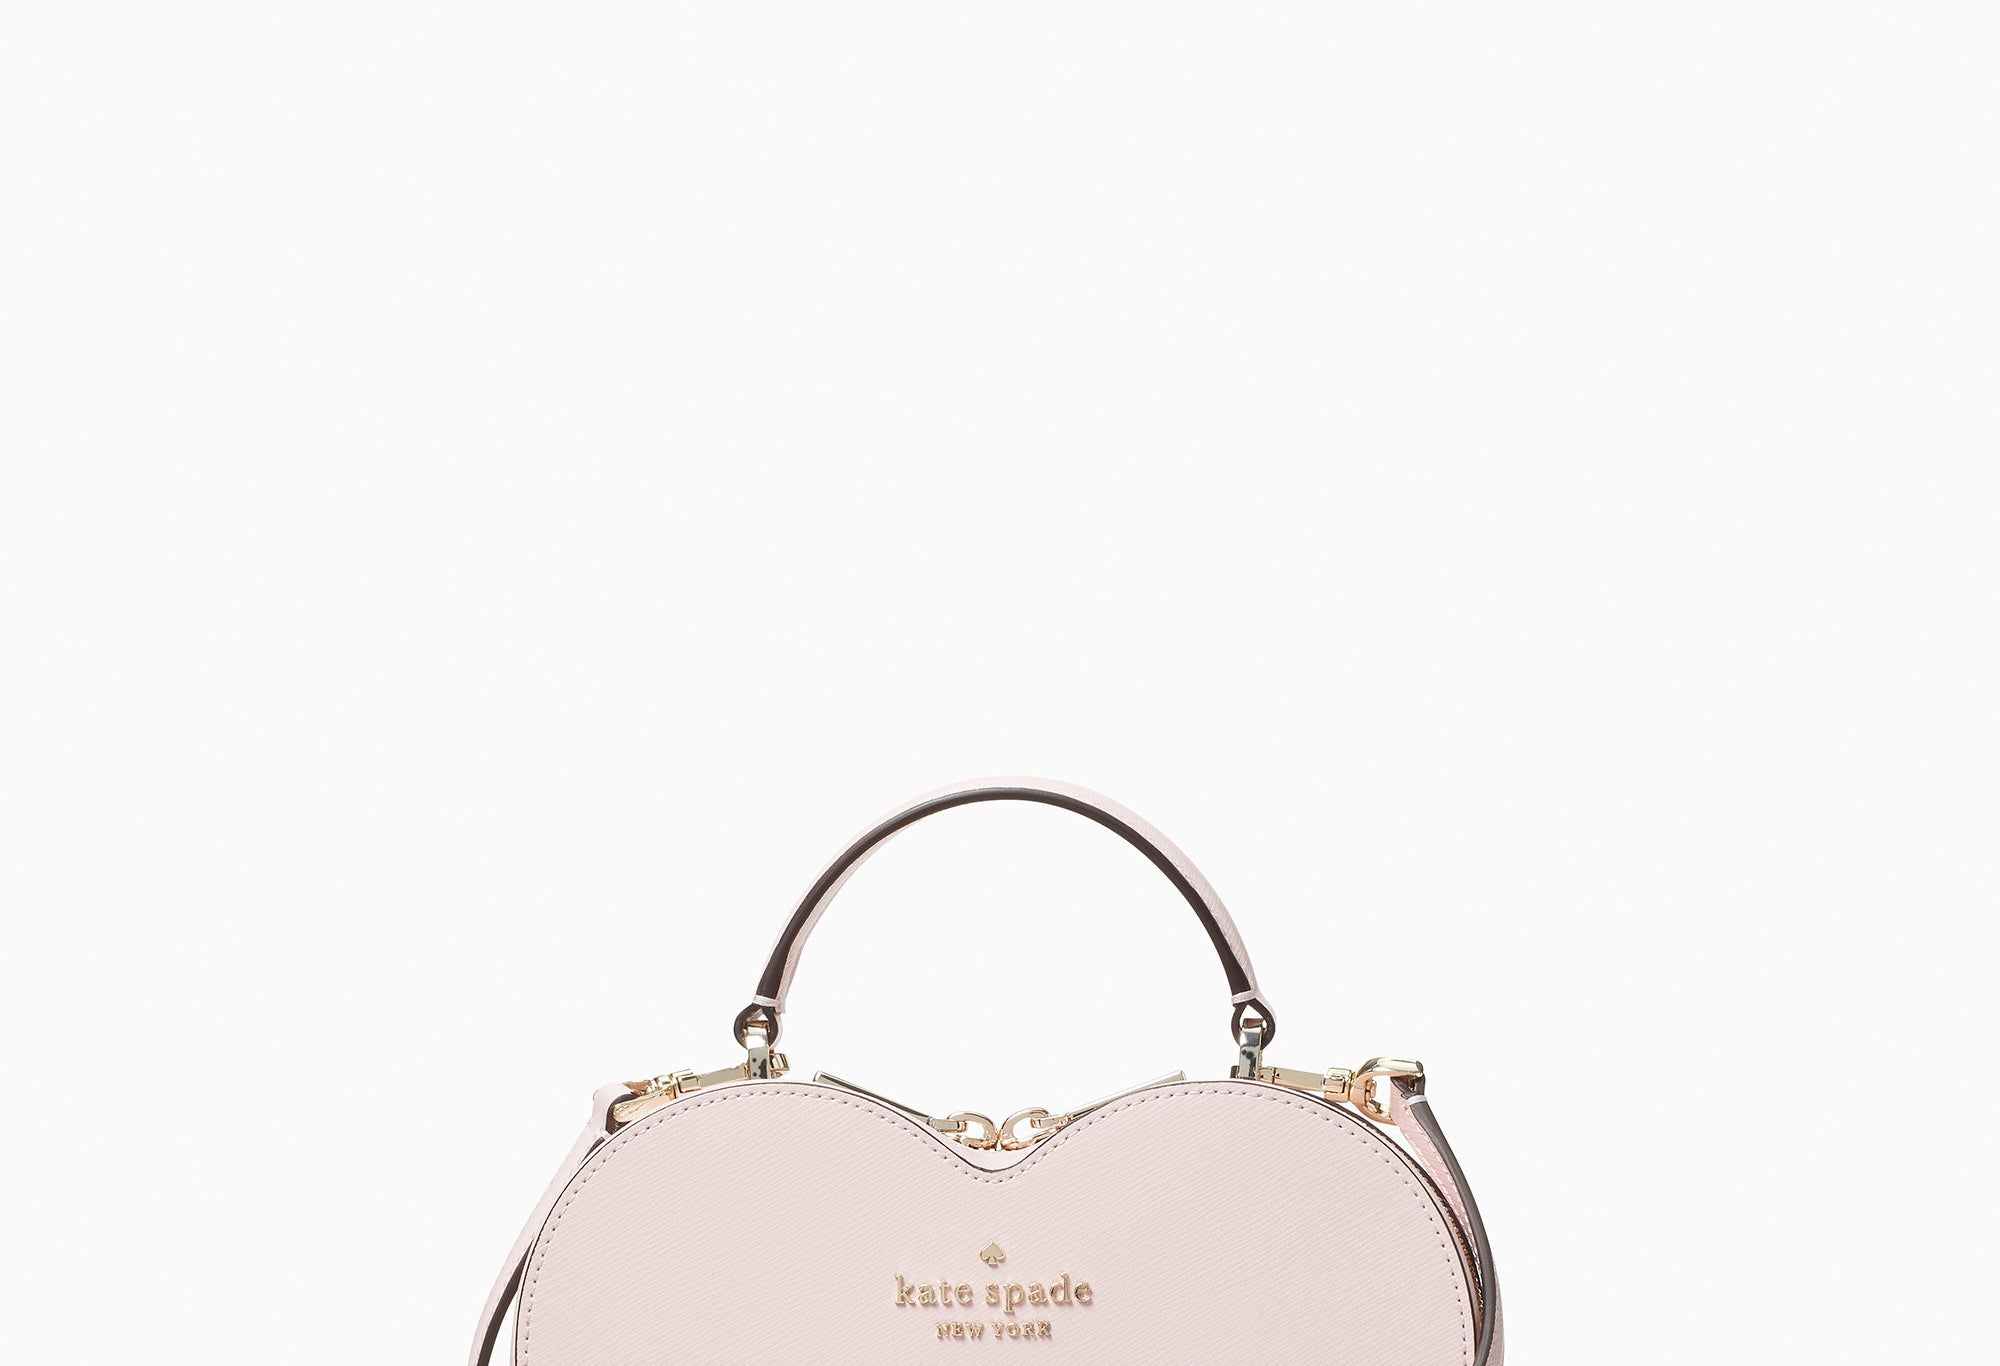 The Best Valentine's Day Gifts for Her in 2022 to Shop Now